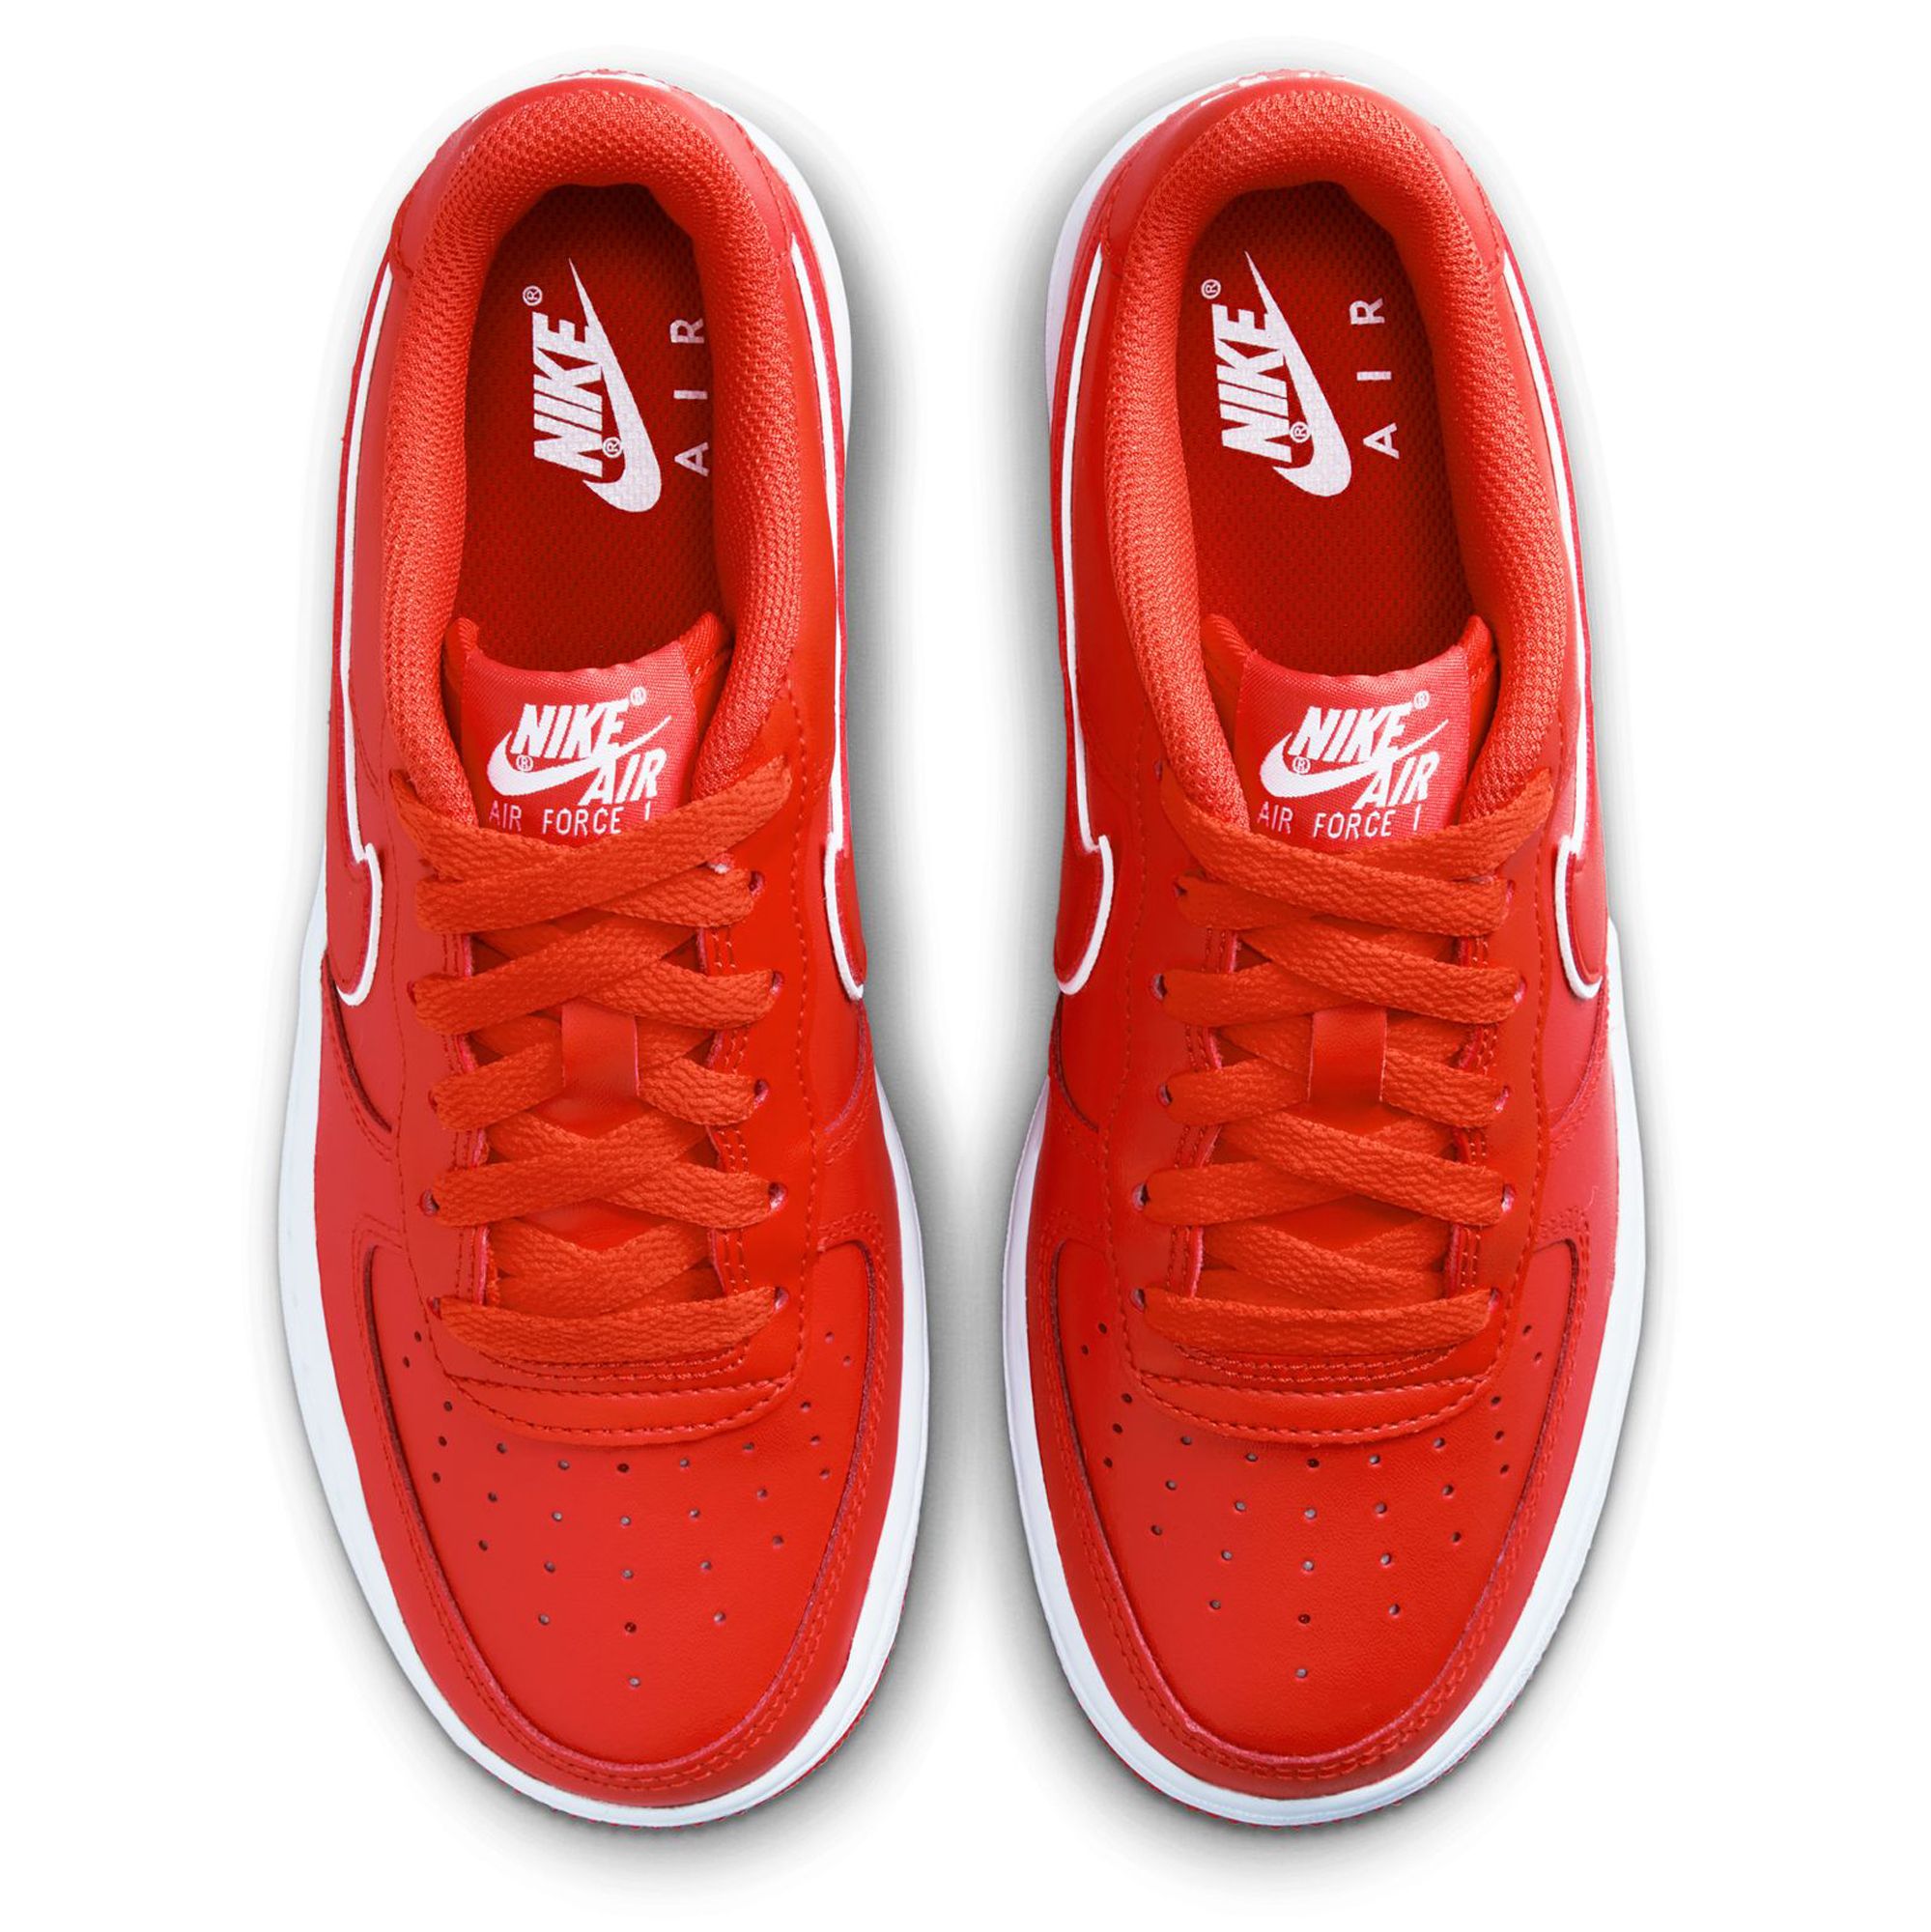 Nike Air Force 1 '07 Shoes 'White/Picante Red' 11.5